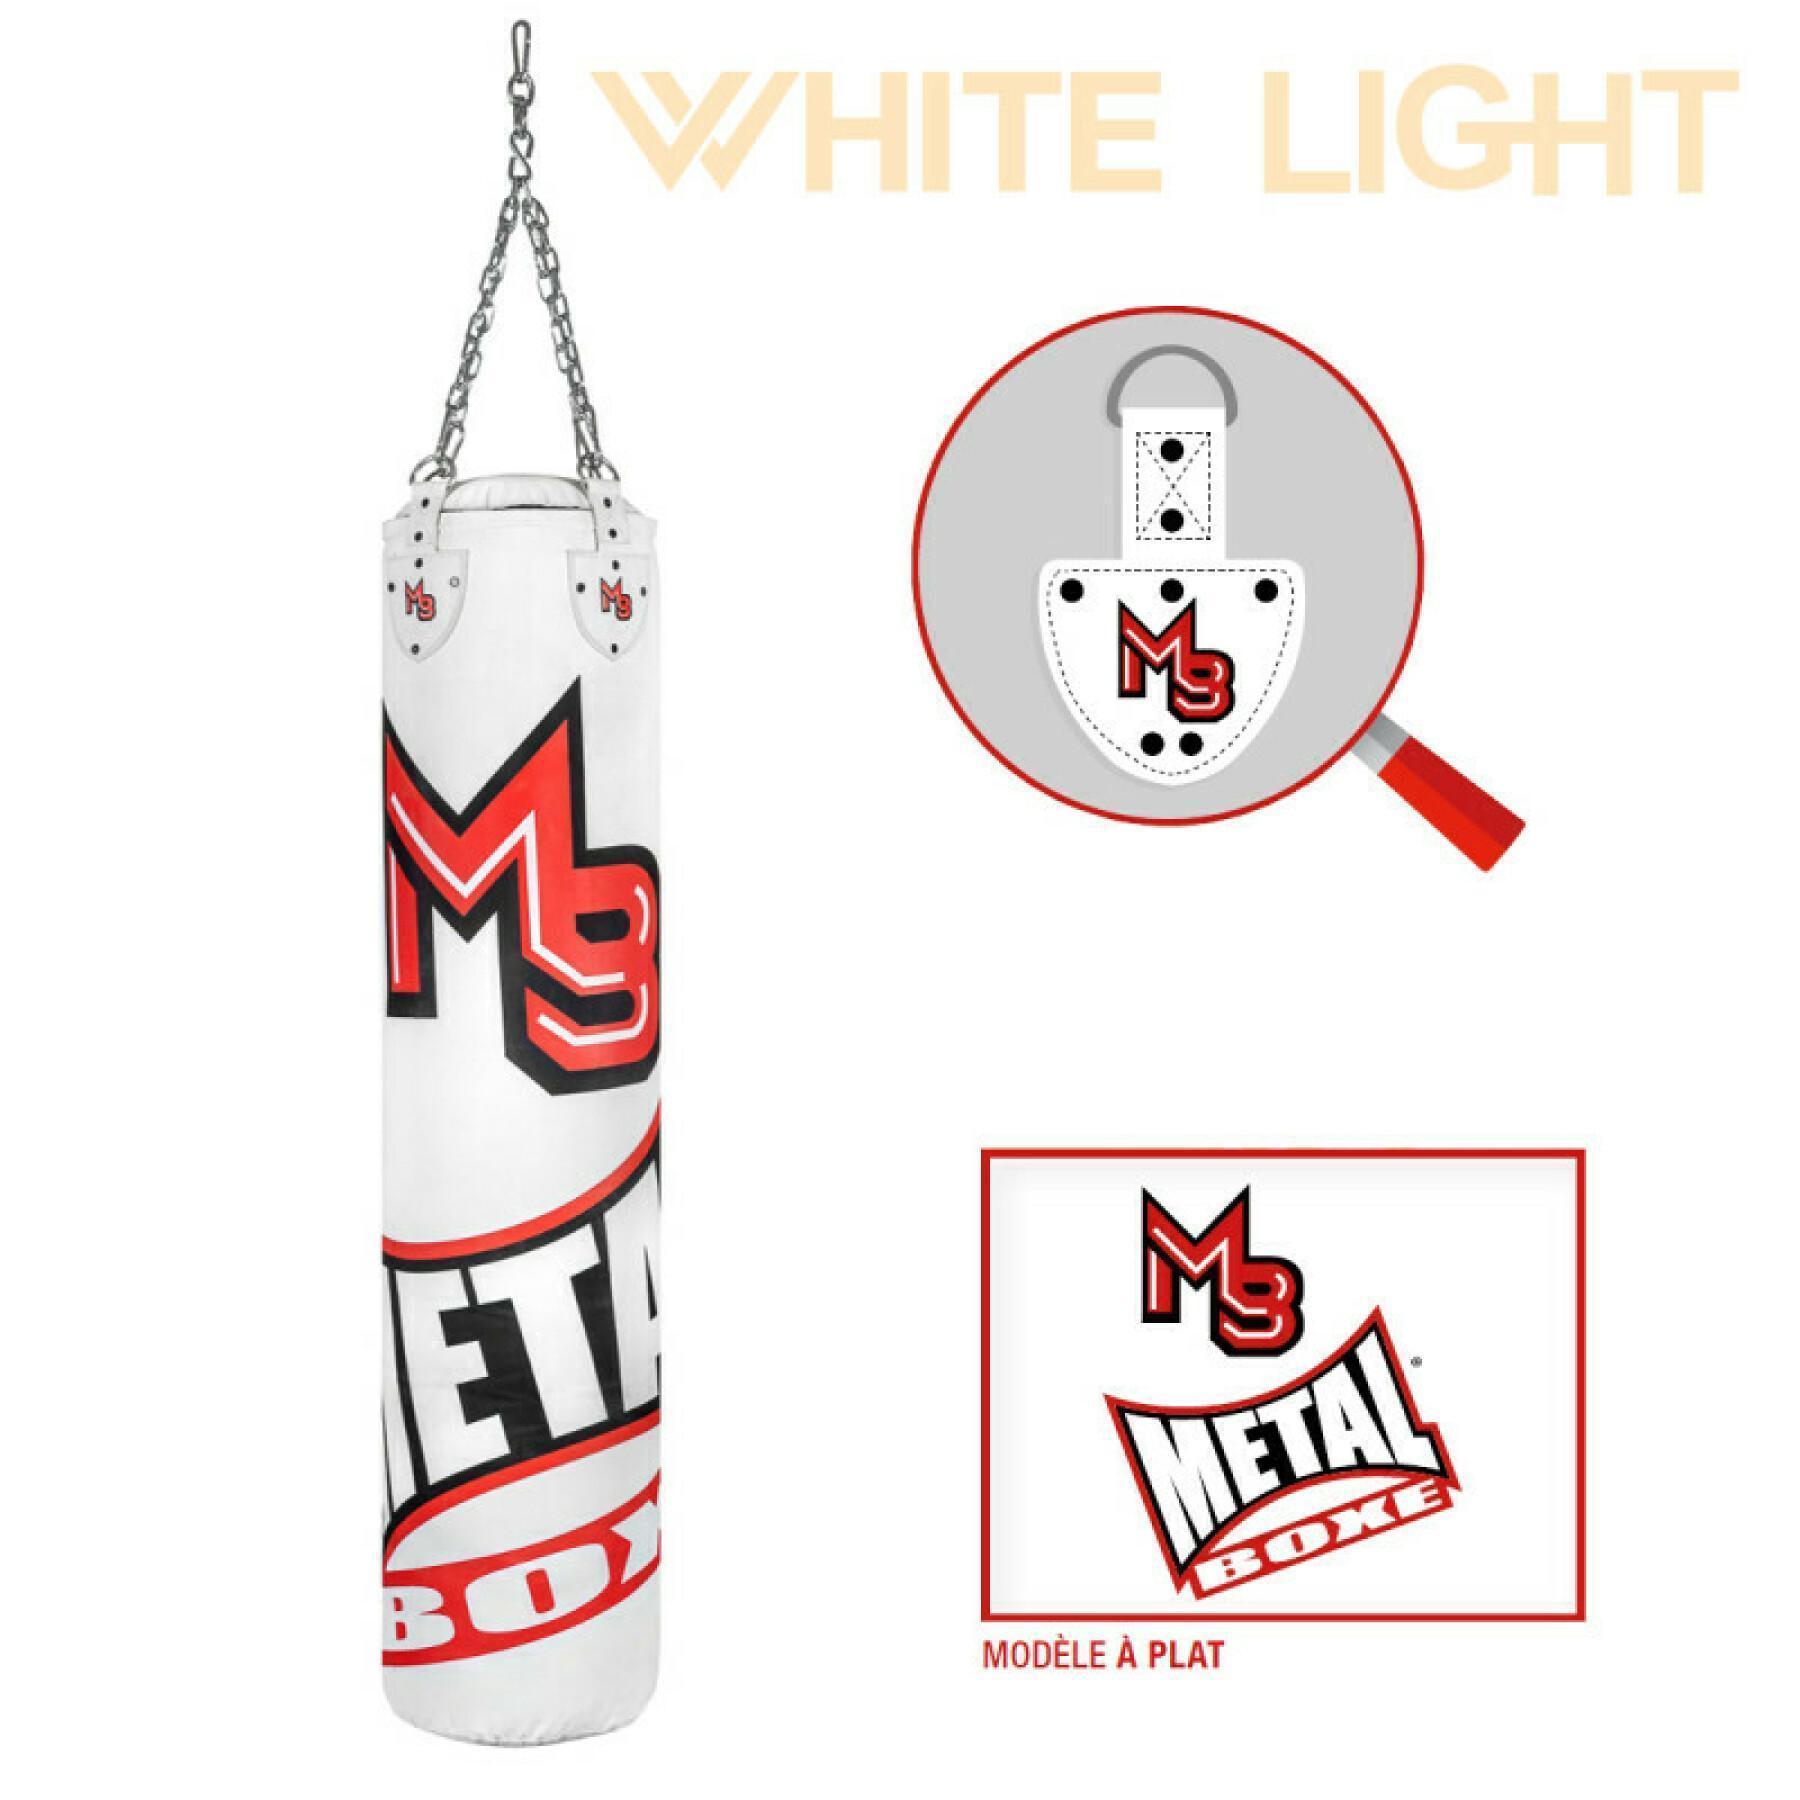 METAL BOXE Metal Boxe MB146 - Coquille Homme white - Private Sport